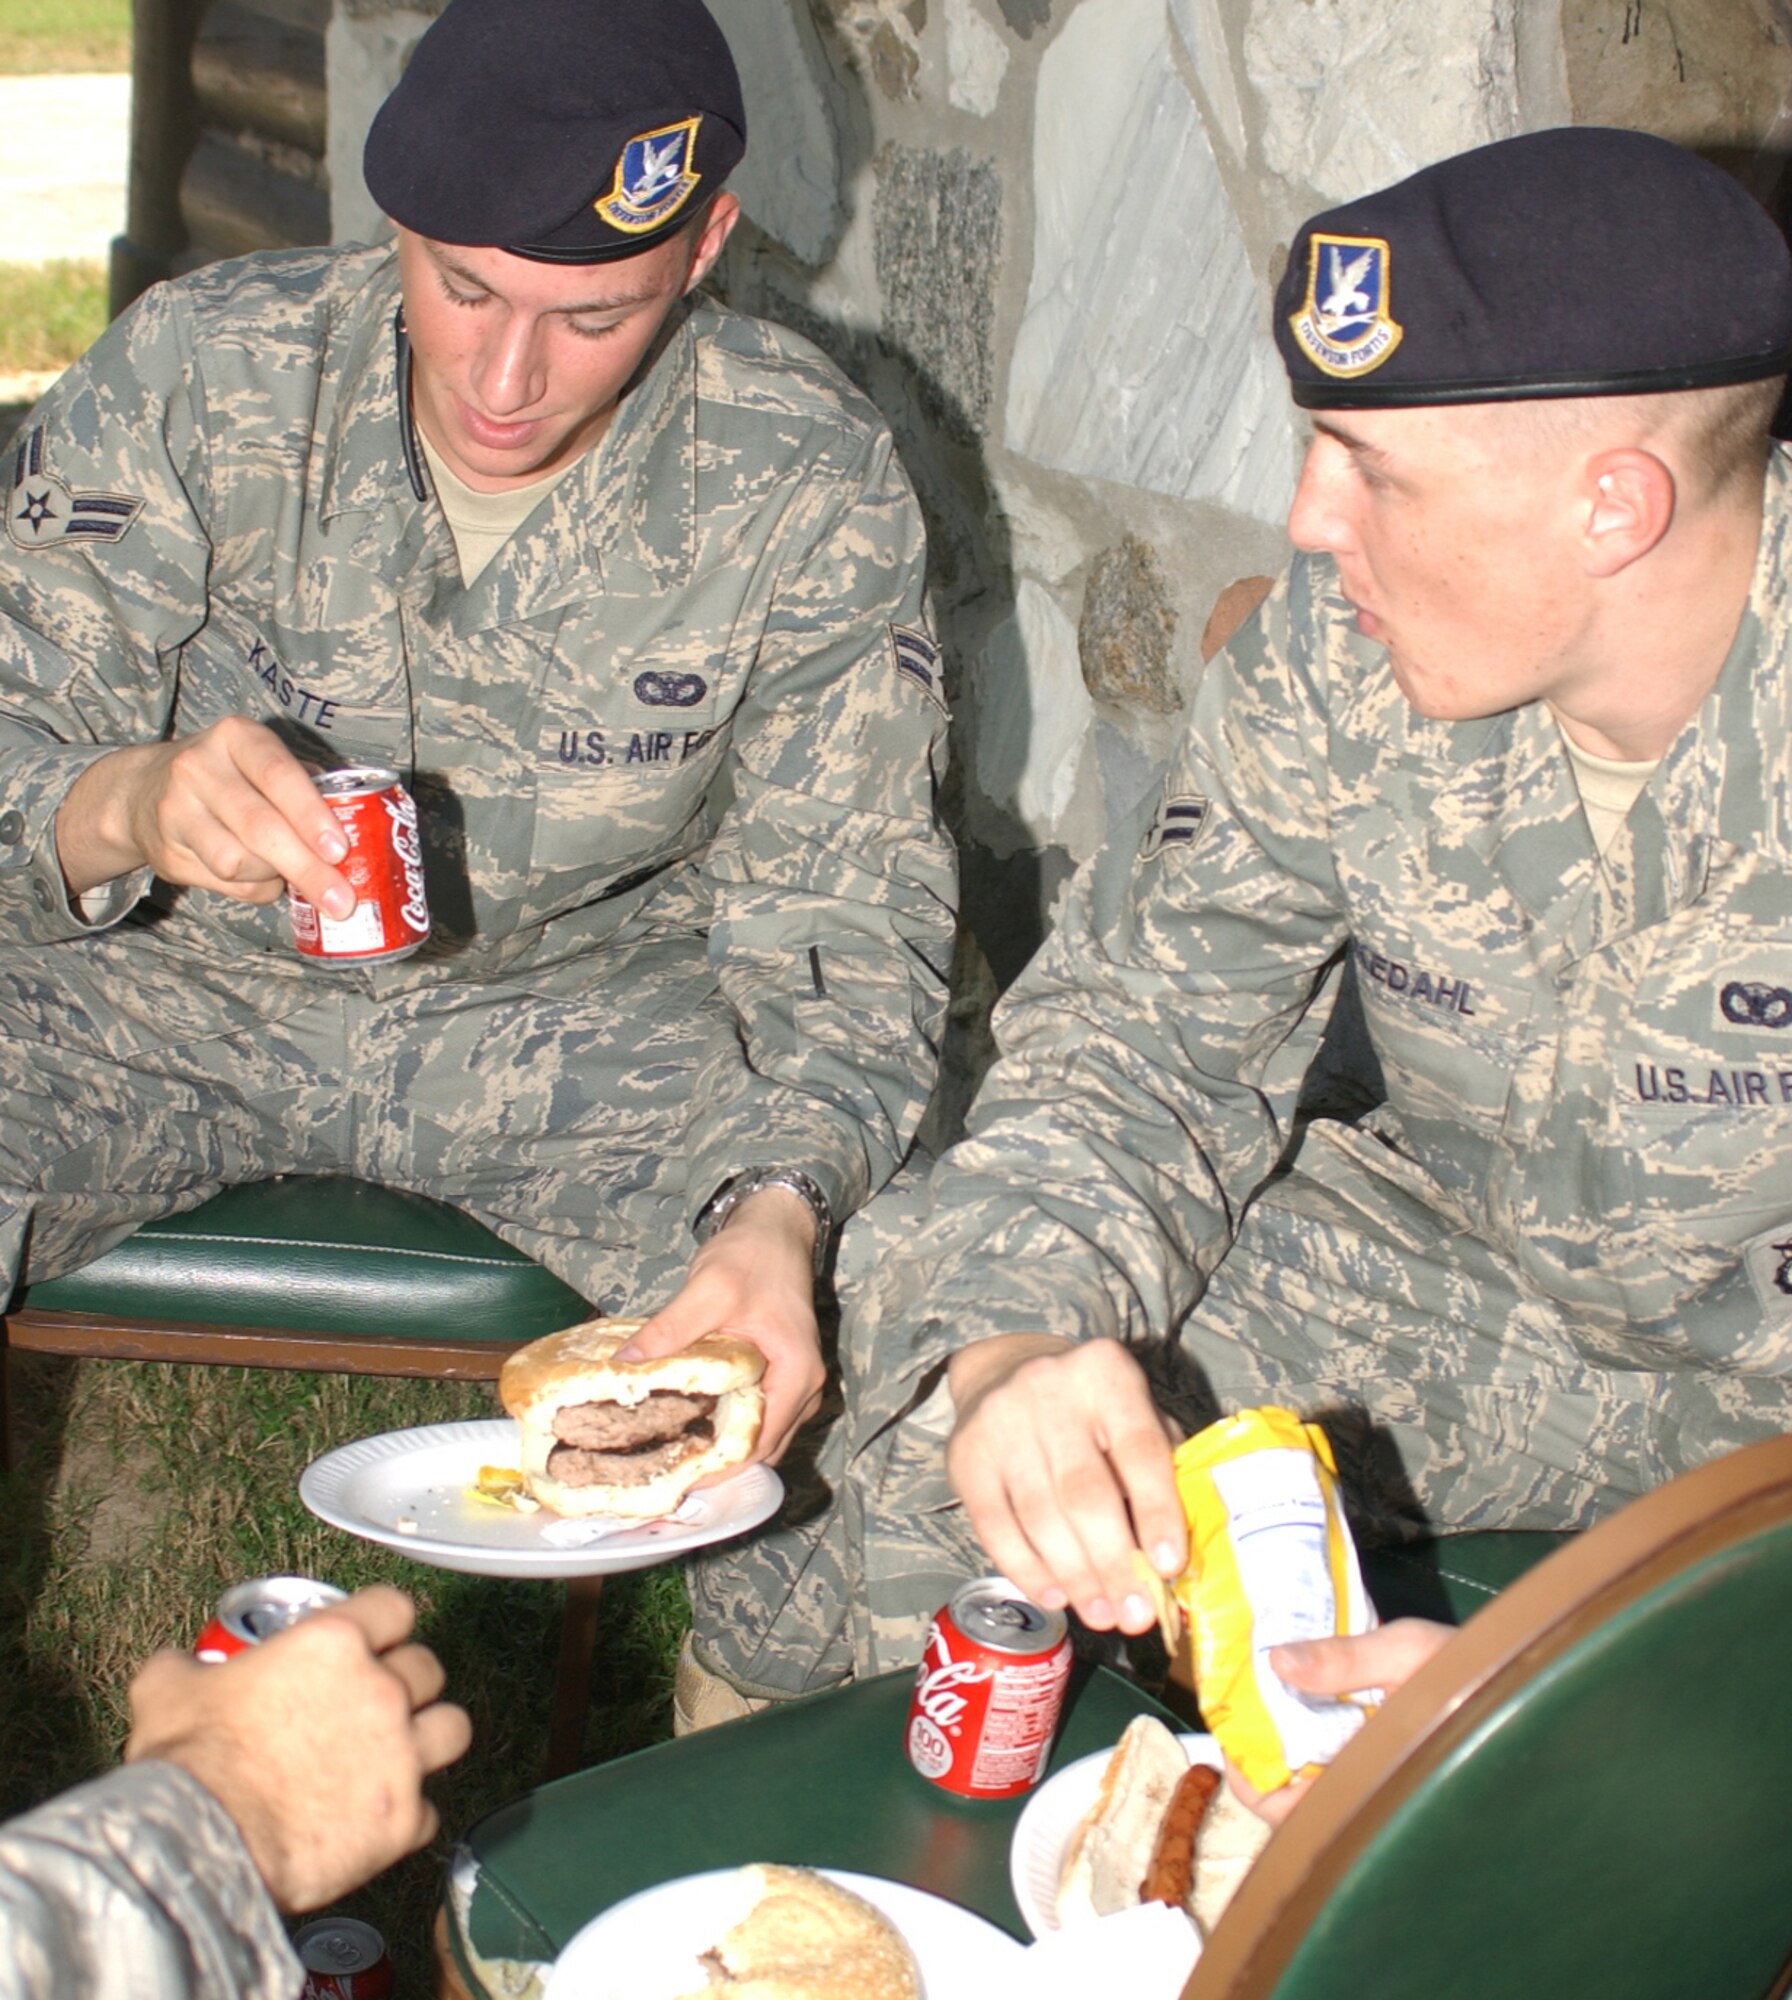 Airmen 1st Class Steven Kaste, left, and Haakon Folkedahl, 81st Security Forces Squadron, enjoy themselves at a birthday picnic and welcome home to deployed troops at marina park Sept. 19. (U.S. Air Force photo by Kemberly Groue)